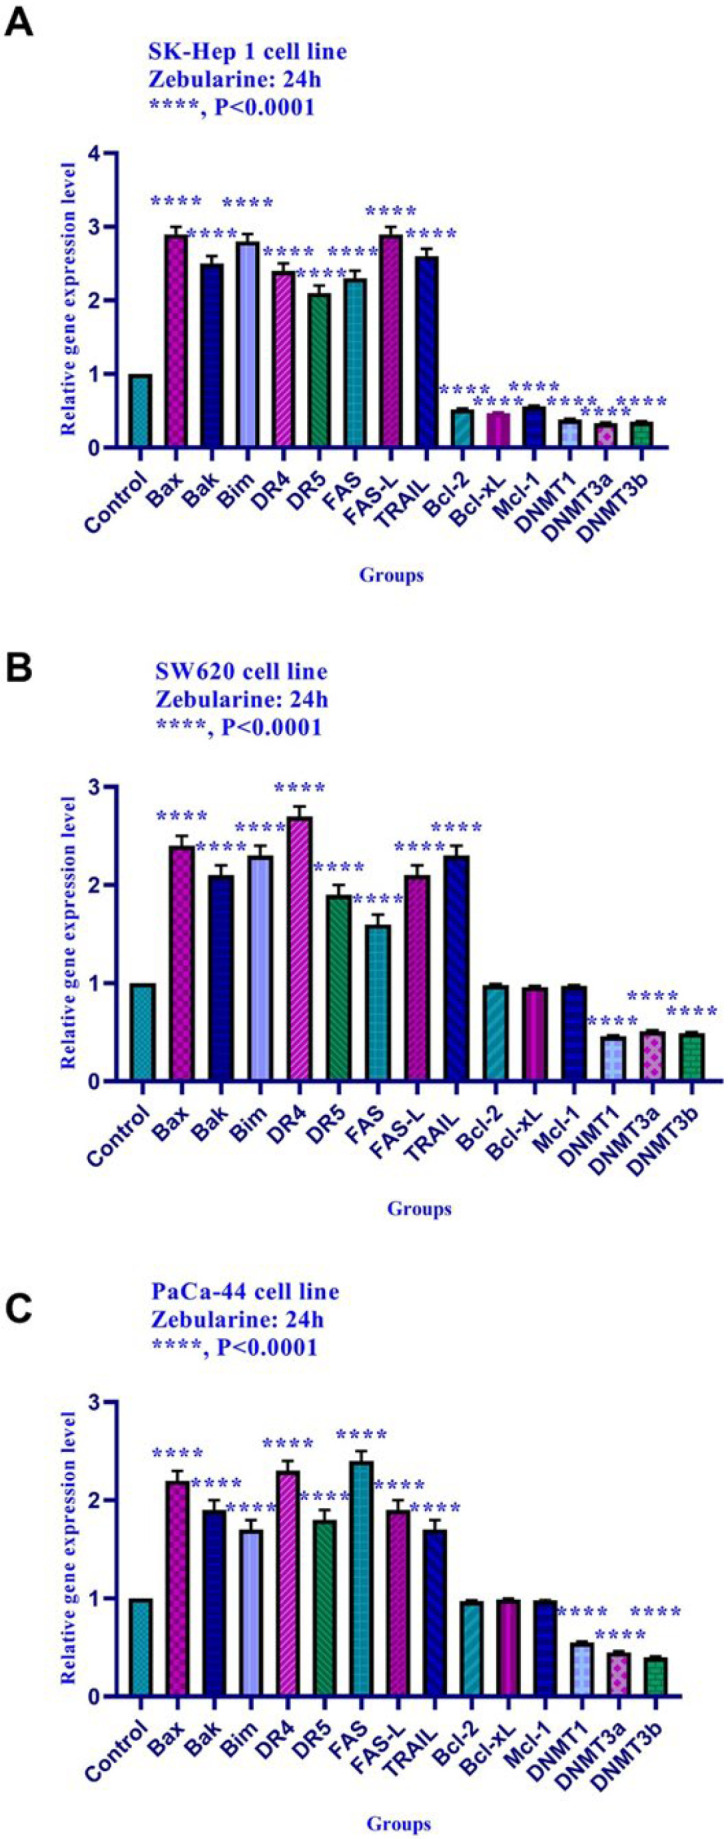 The relative expression level of Bim, Bax, Bak, Bcl-xL, Bcl-2, Mcl-1, DR4, DR5, FAS, FAS-L, TRAIL, DNA methyltransferase 1, 3a, and 3b, and histone deacetylase inhibitors 1, 2, and 3 in SK-Hep 1, SW620, and PaCa-44 cells treated with zebularine at 24 h. Quantitative reverse transcription-polymerase chain reaction analysis demonstrated that this compound up-regulated the expression of Bax, Bak, Bim, DR4, DR5, FAS, FAS-L, TRAIL, and down-regulated the expression of Bcl-2, Mcl-1, Bcl-xL, DNA methyltransferase 1, 3a, and 3b significantly. This compound had no significant effect on Bcl-2, Mcl-1, and Bcl-xLgene expression in SW620, and PaCa-44 cell lines. Asterisks indicate significant differences between treated cells and the control groups. Data are presented as means ± standard error of the mean. ****P < 0.0001